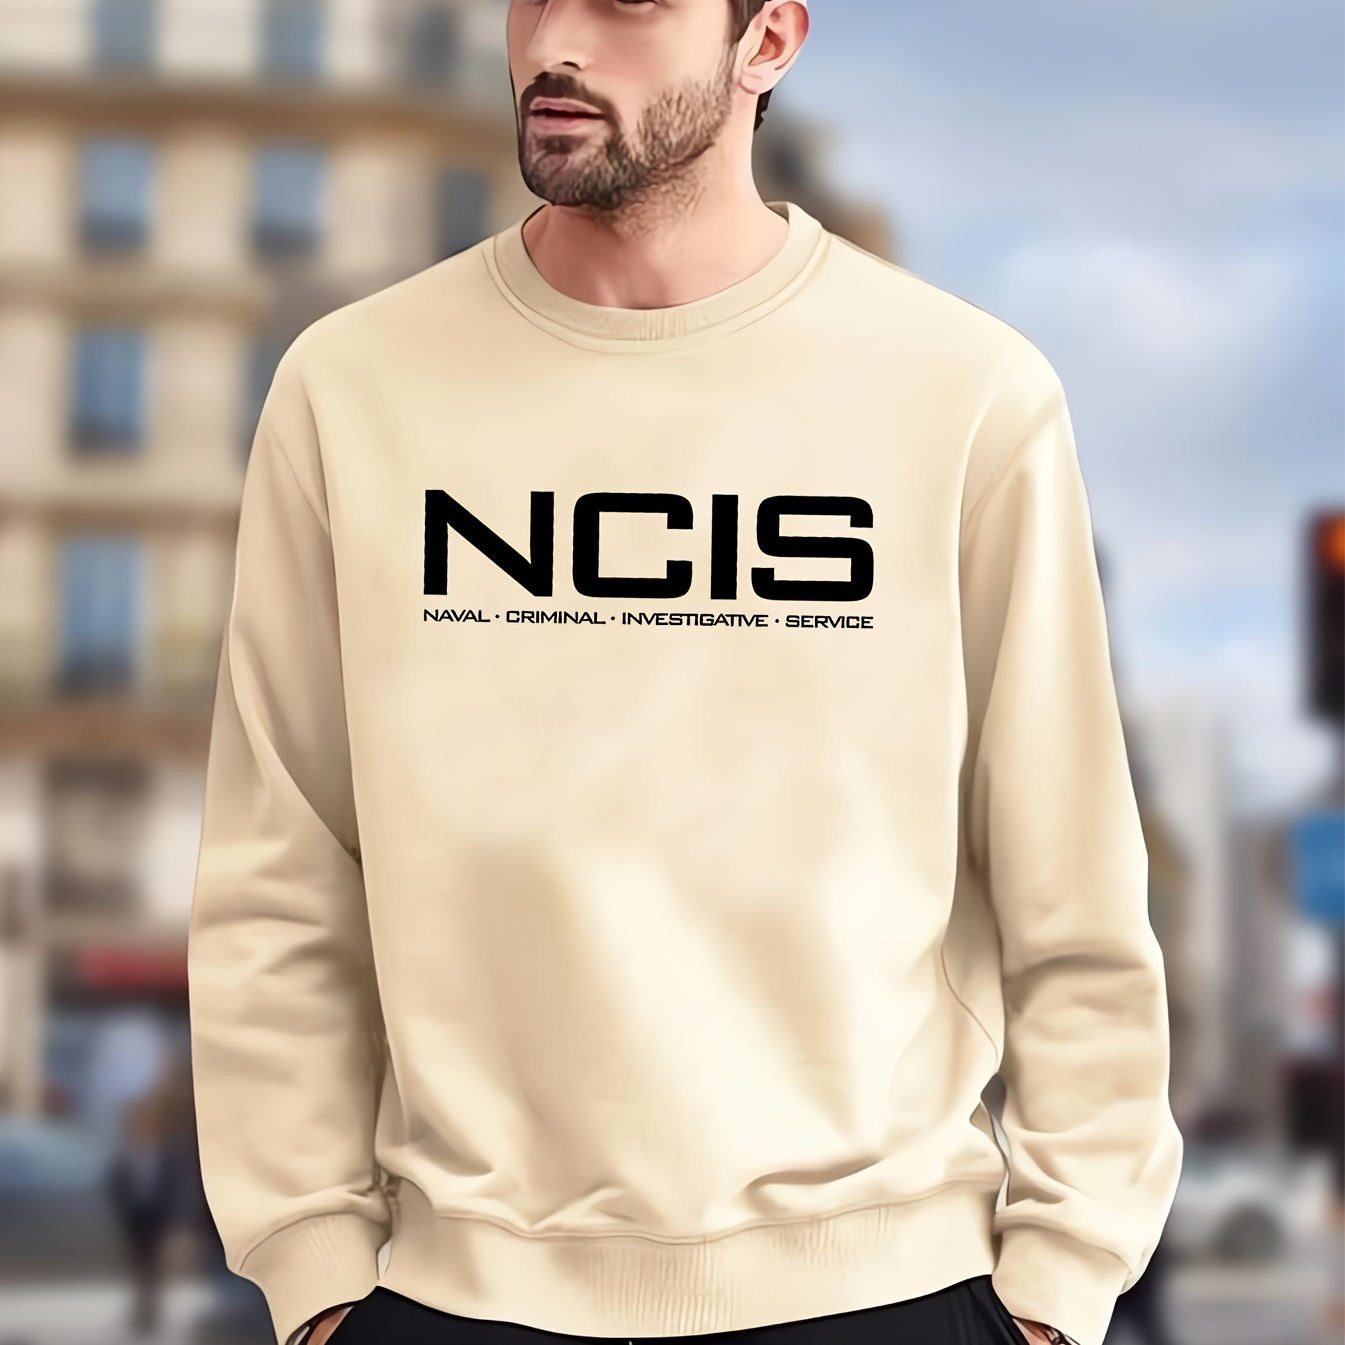 

Men's Pullover Round Neck Long Sleeve Sweatshirt "ncis" Pattern Casual Top For Autumn Winter Men's Clothing As Gifts